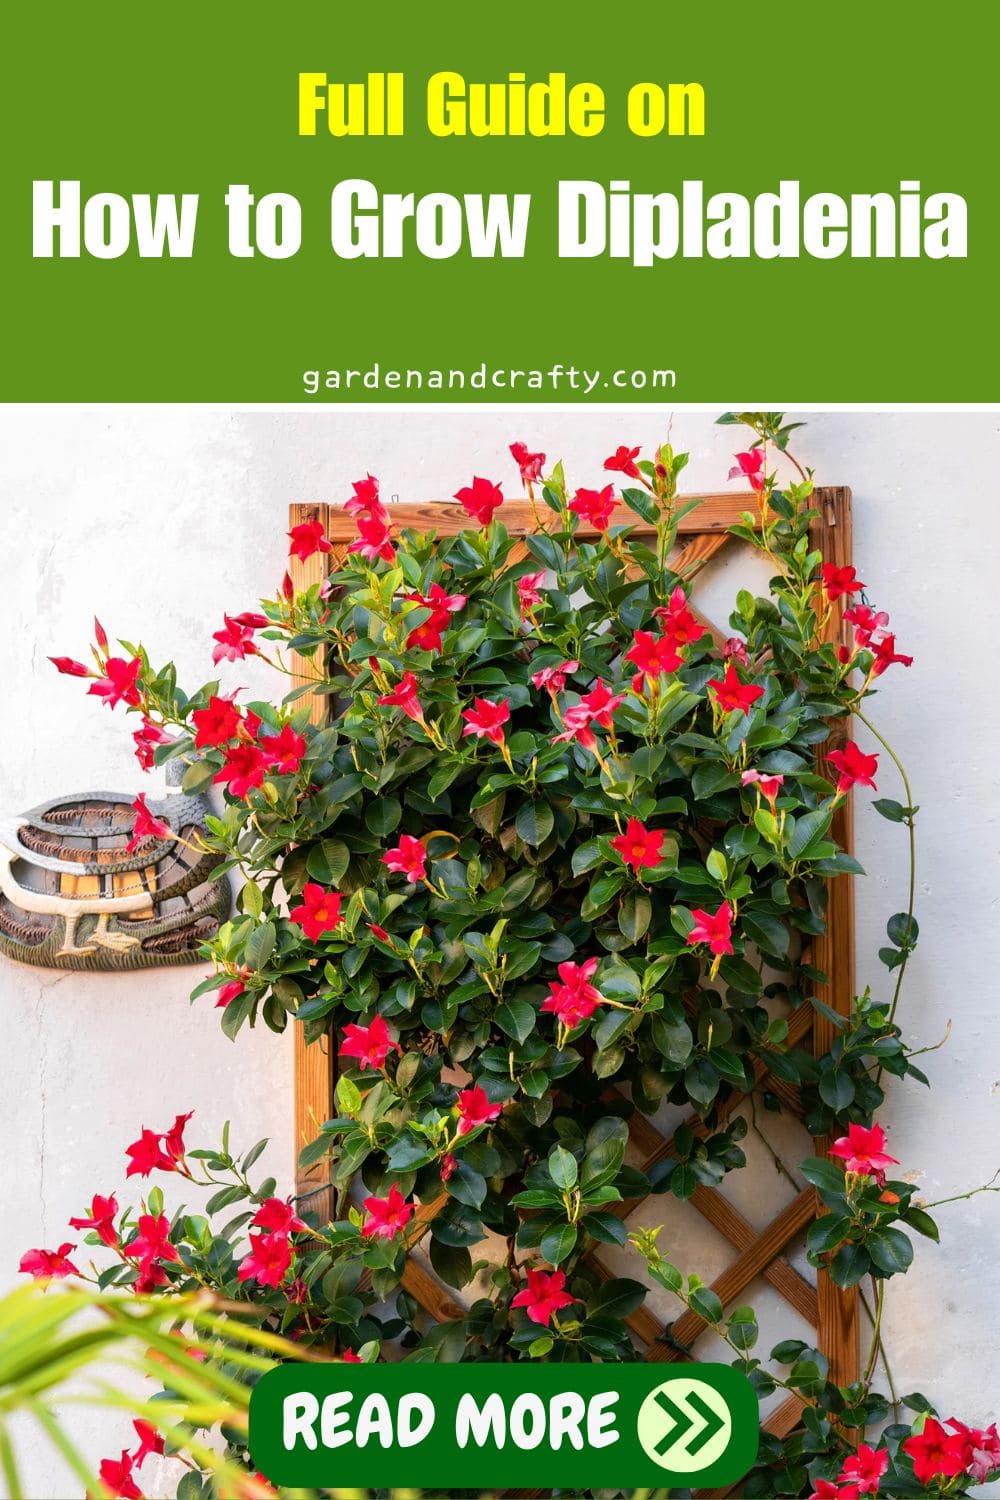 Full Guide on How to Grow Dipladenia